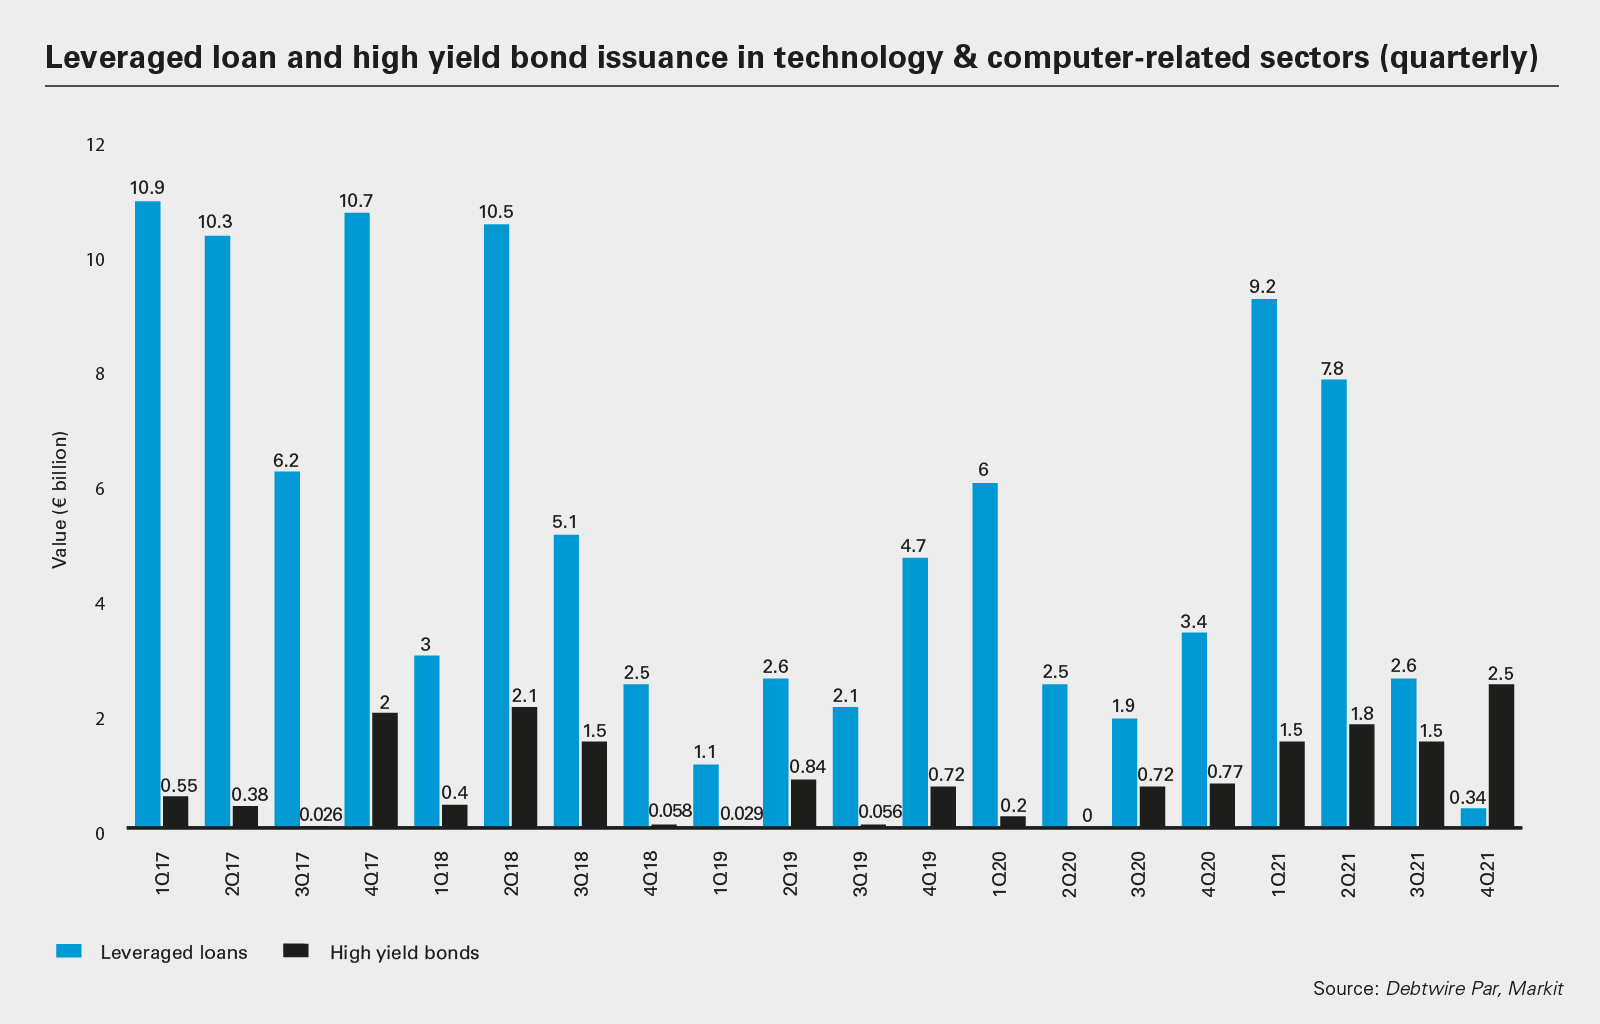 Leveraged loan and high yield bond issuance in technology & computer related sectors (quarterly)